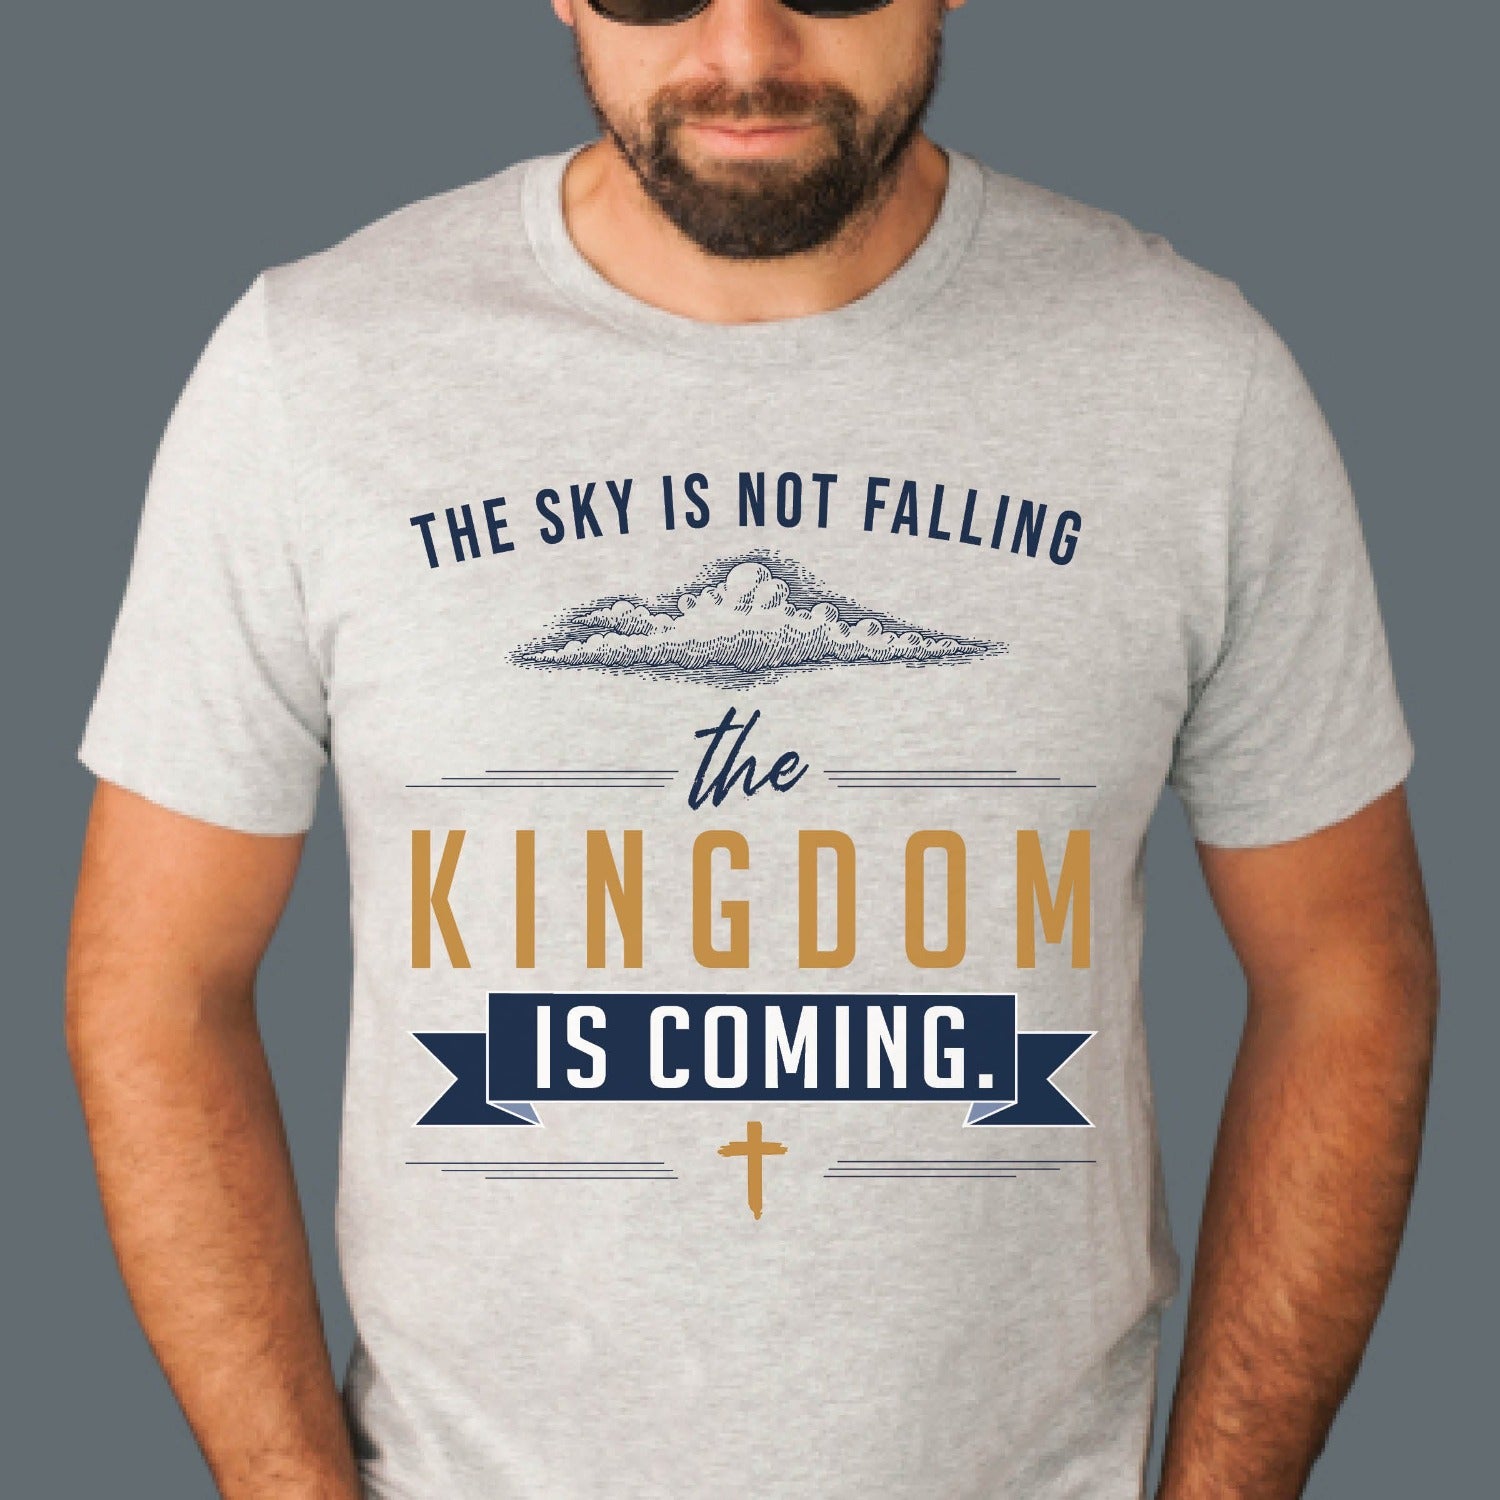 Man, husband, or Dad wearing a heather sport gray unisex t-shirt with a Christian Kingdom of God through Jesus faith-based message that says, "The Sky Is Not Falling, The Kingdom is Coming" with bold font, vintage clouds, banner, and cross design in navy blue and gold, created for bible study Men and Women believers, 2024 eclipse